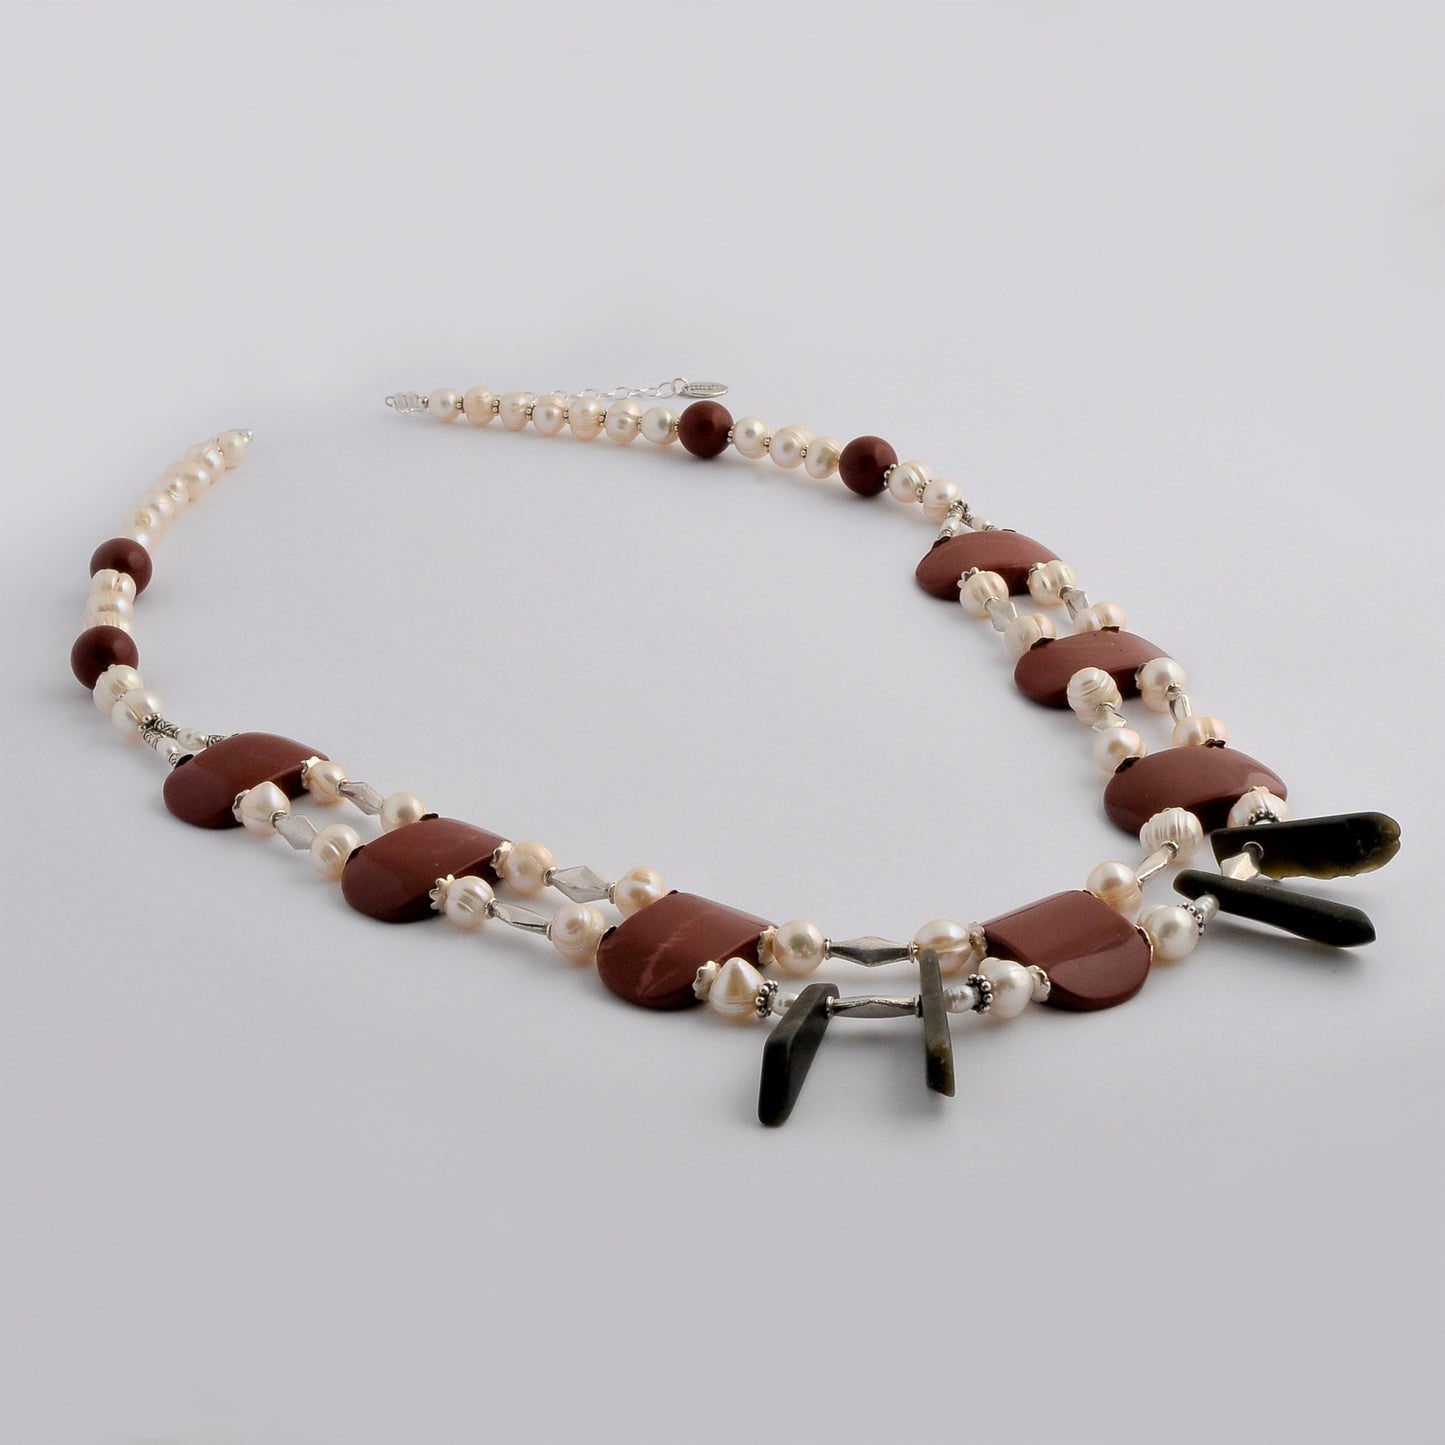 Handmade  necklace with pearls, jasper, onyx and sterling silver elements.